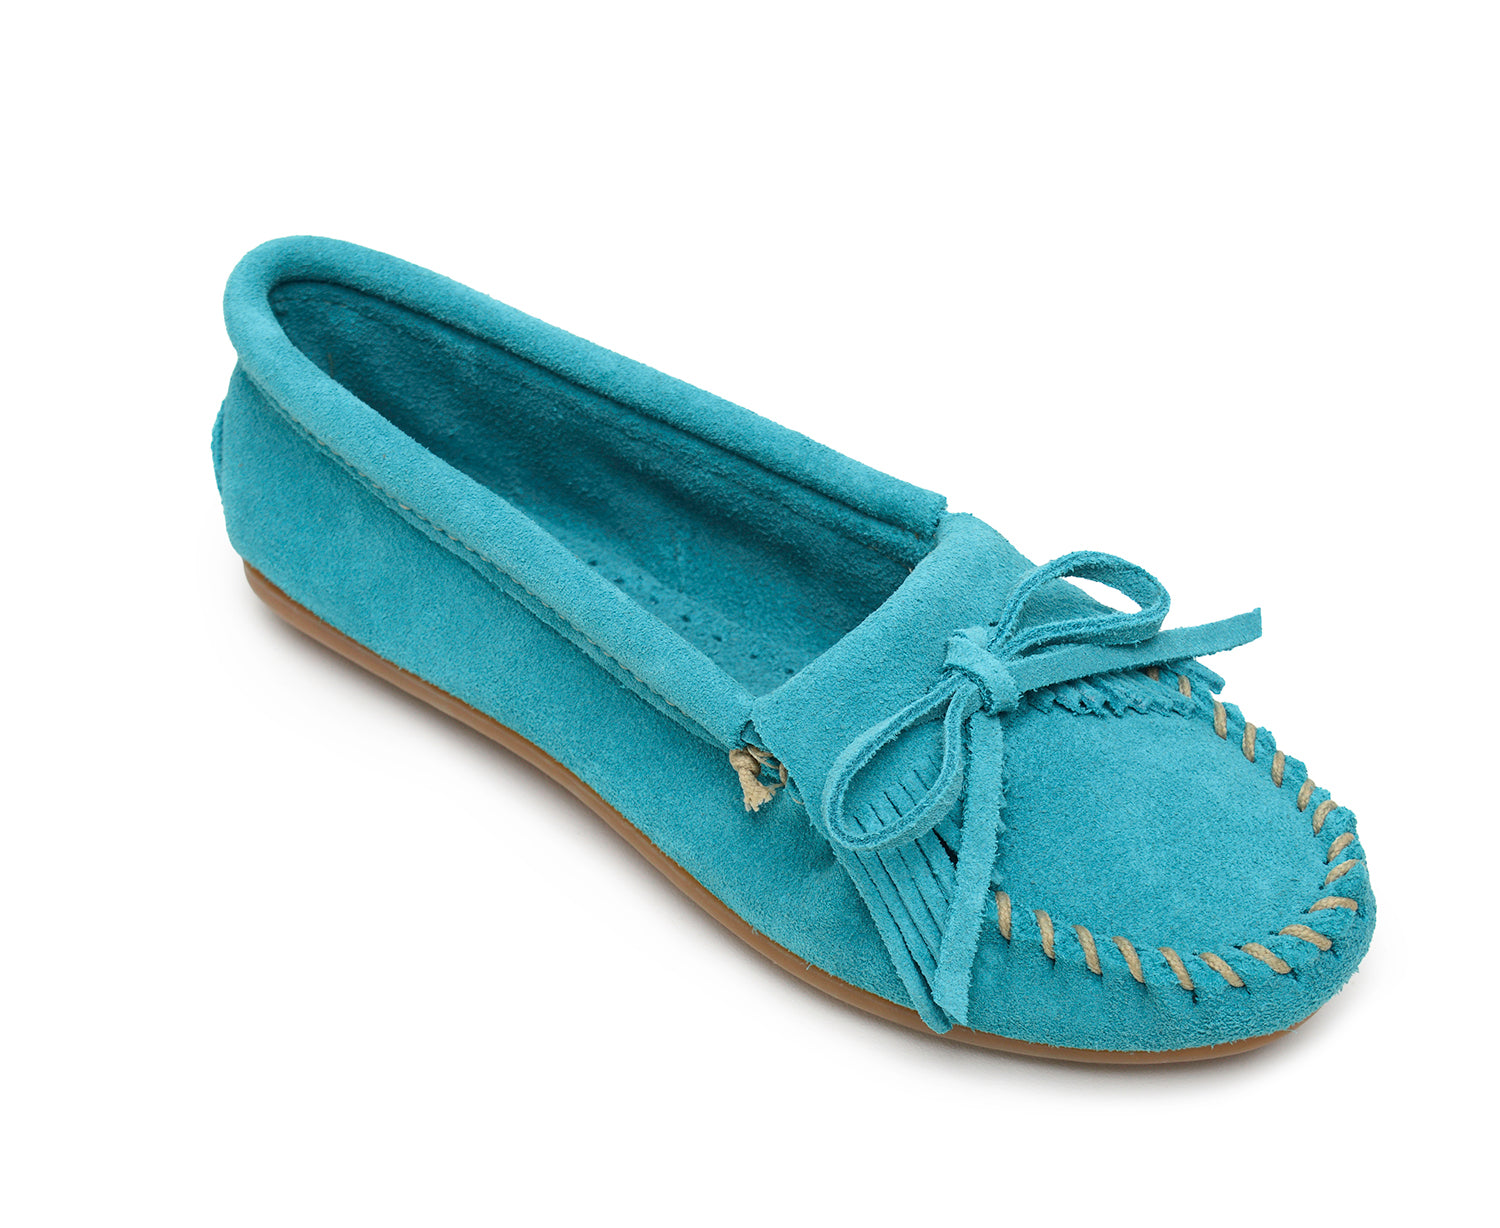 Kilty Hardsole Moccasin in Turquoise from 3/4 Angle View